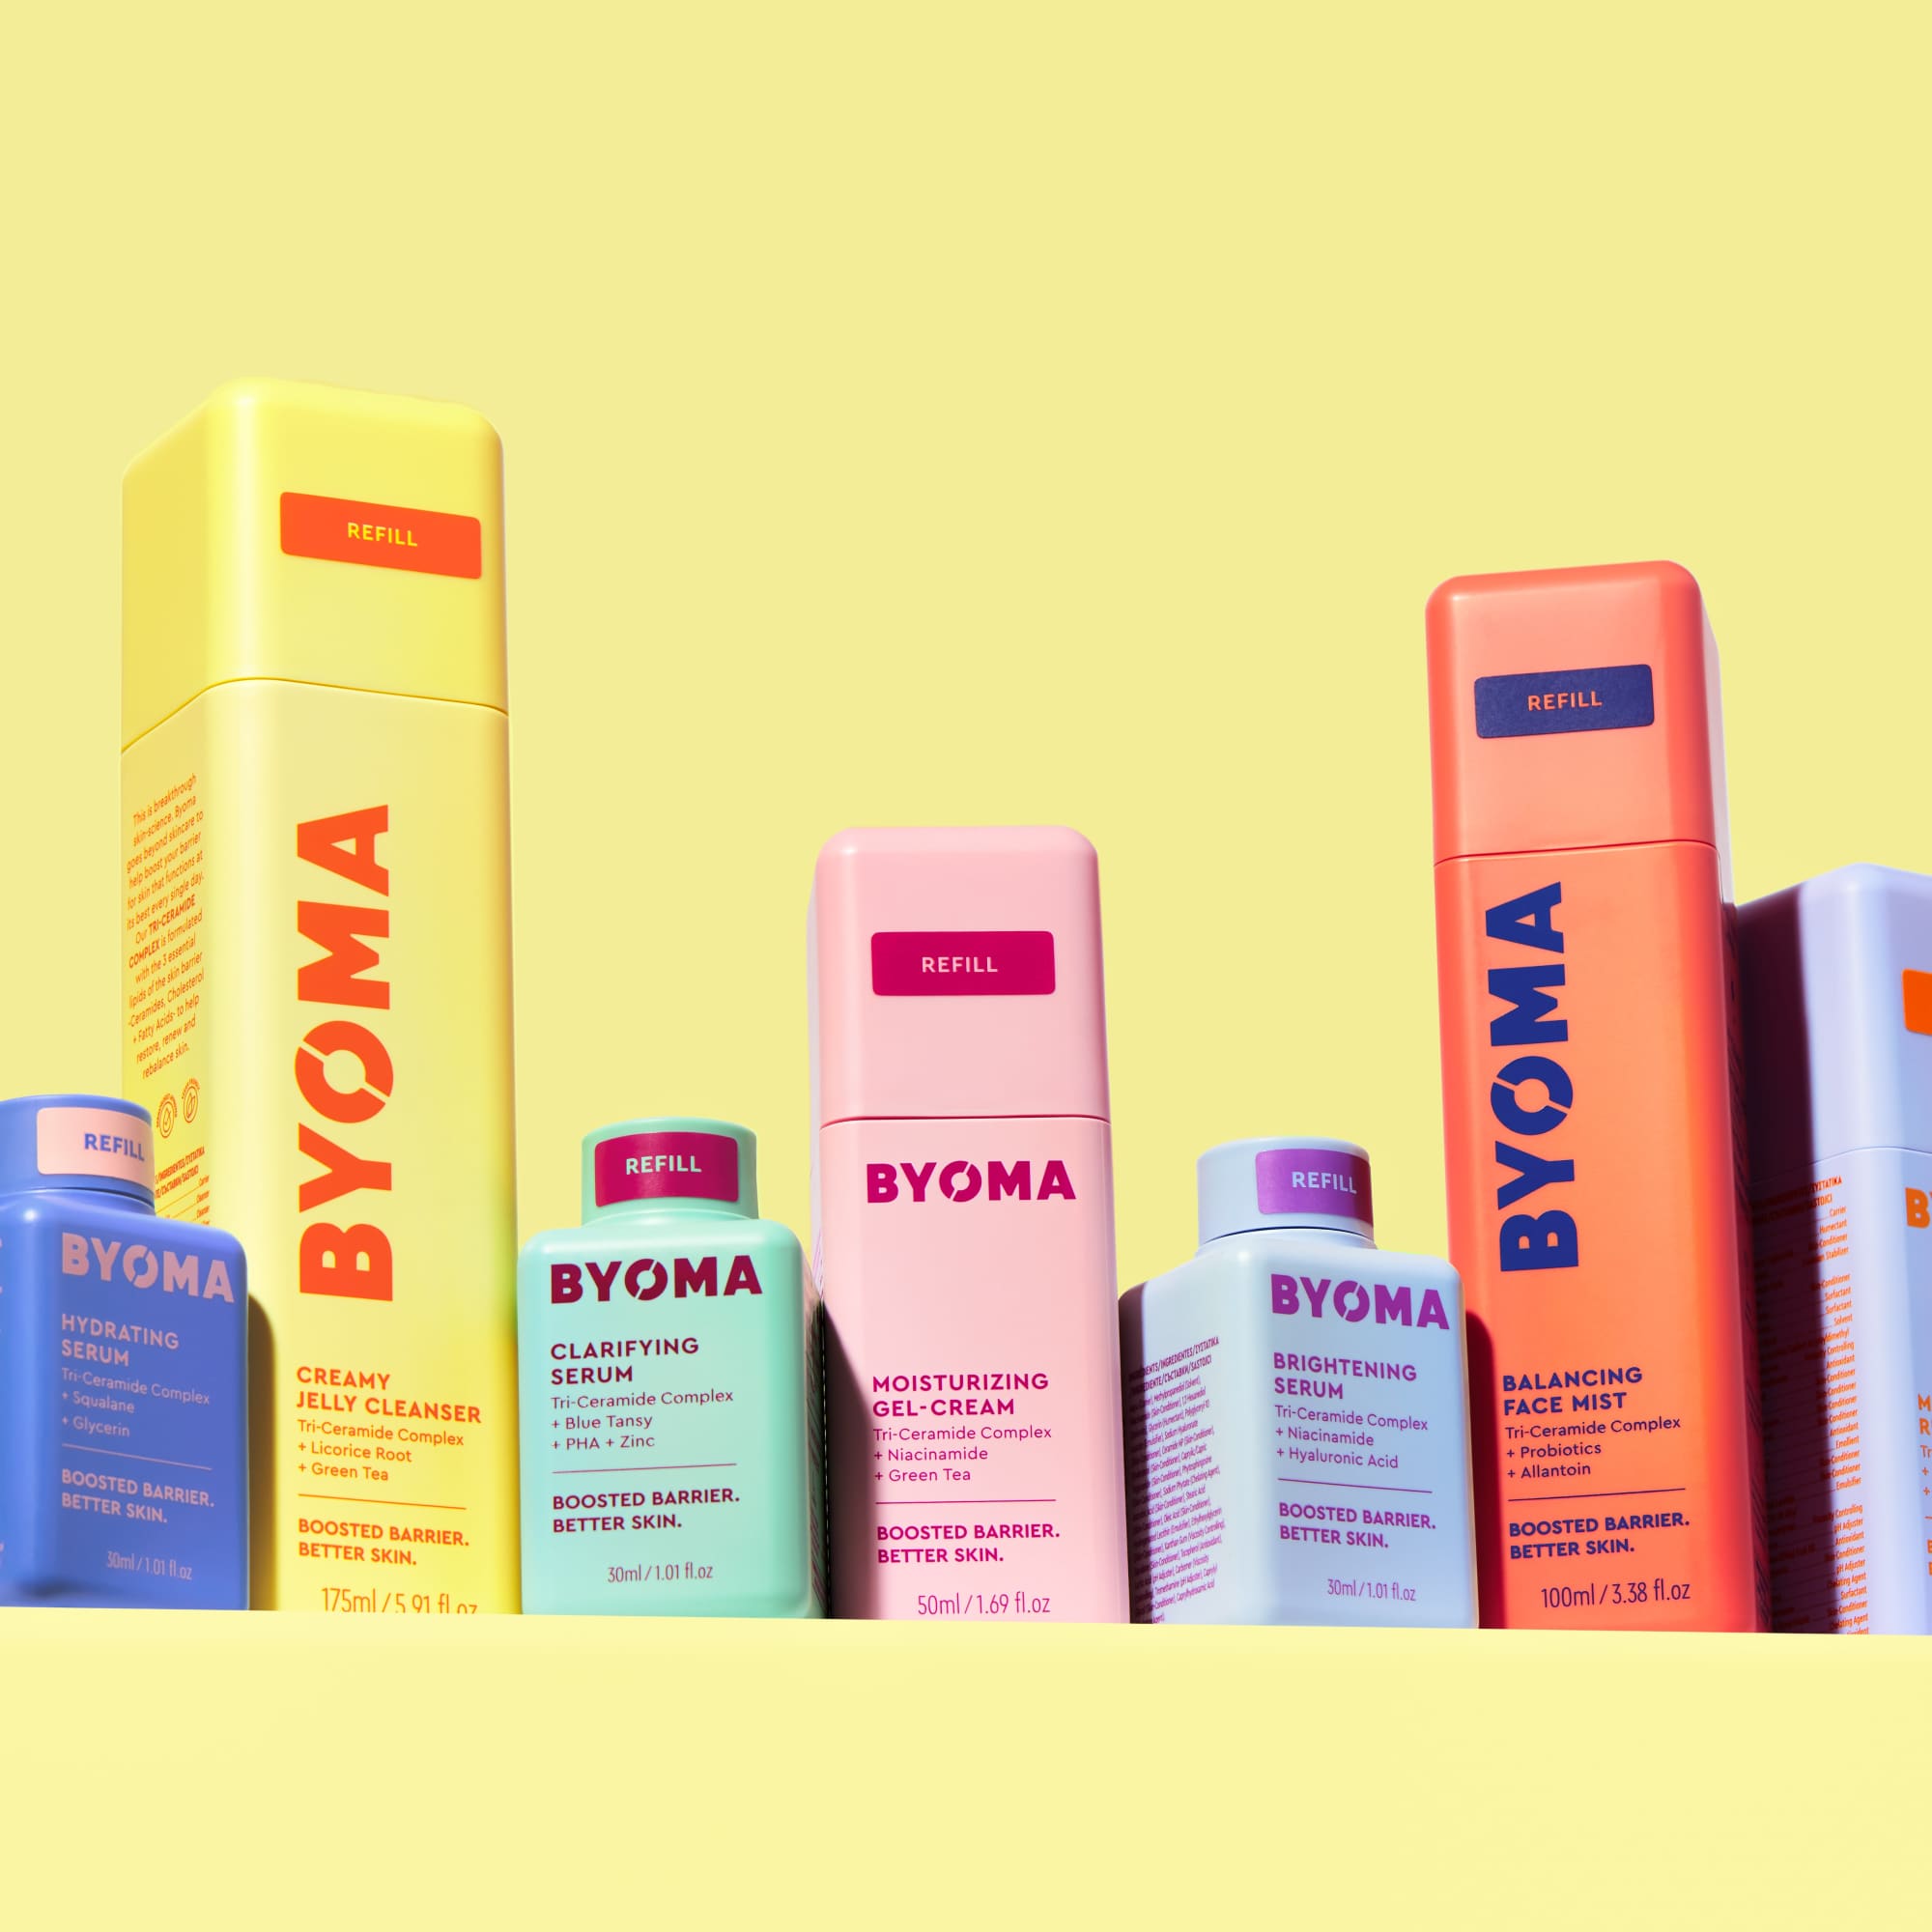 Meet Byoma The Uks First Entirely Refillable Skin Care Range